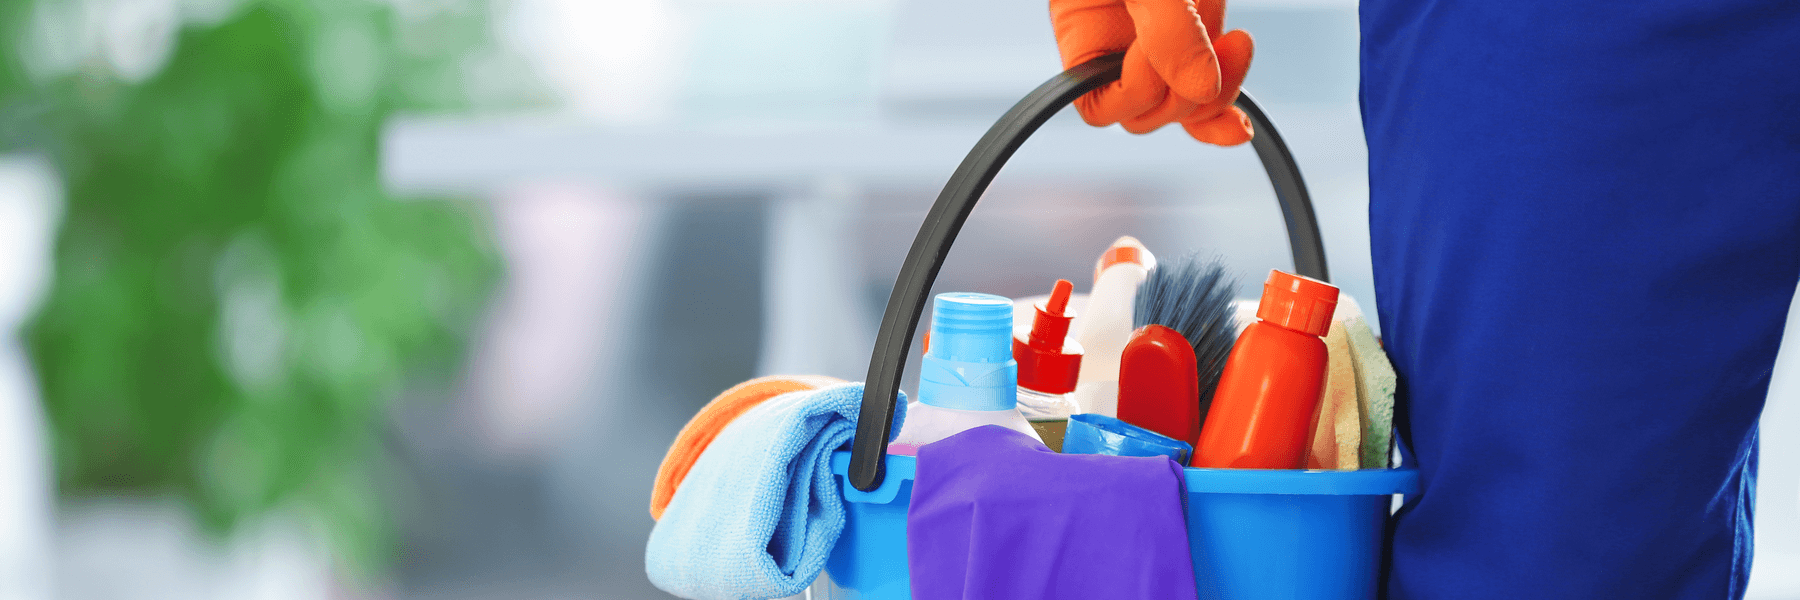 Man wearing glove carrying bucket full of different cleaning products and supplies